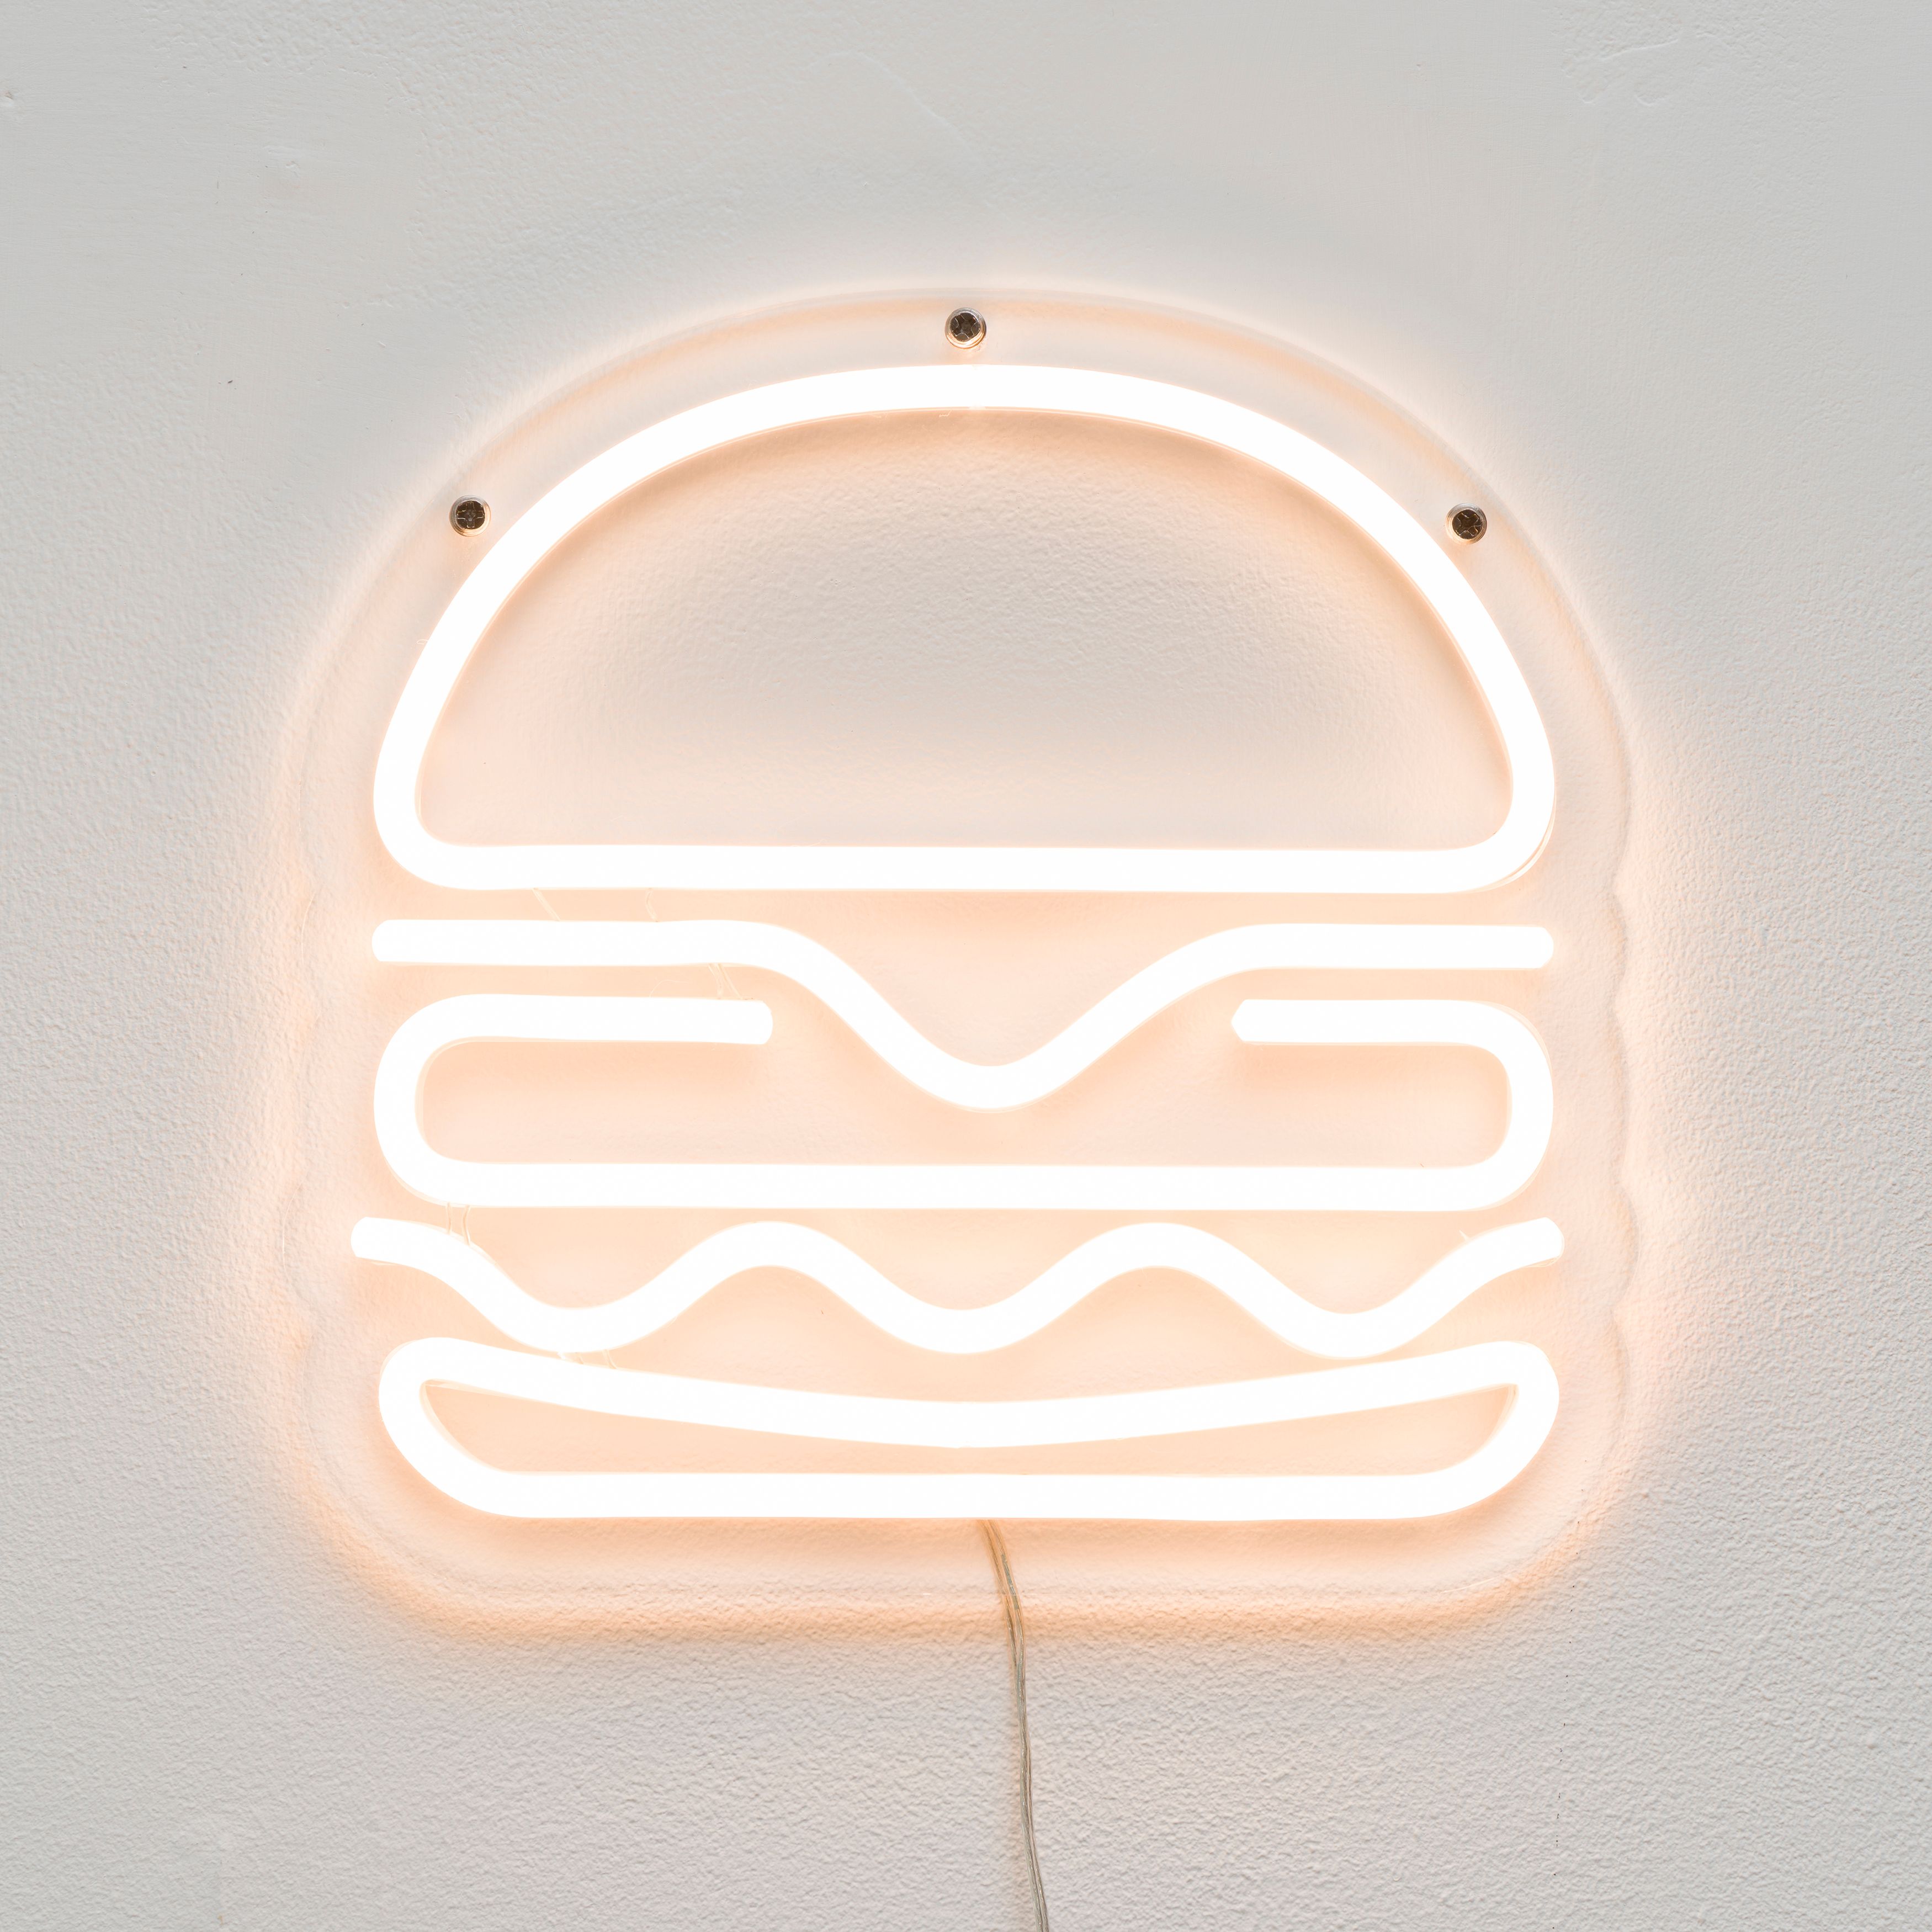 Choey Eun Young Cho, HAMBURGER, 2022, CNC engraved plexiglass, LED strip lights, connection wires, silicone tubes, 9 1⁄2 x 9 1⁄2 in. (24.13 x 24.13 cm) 